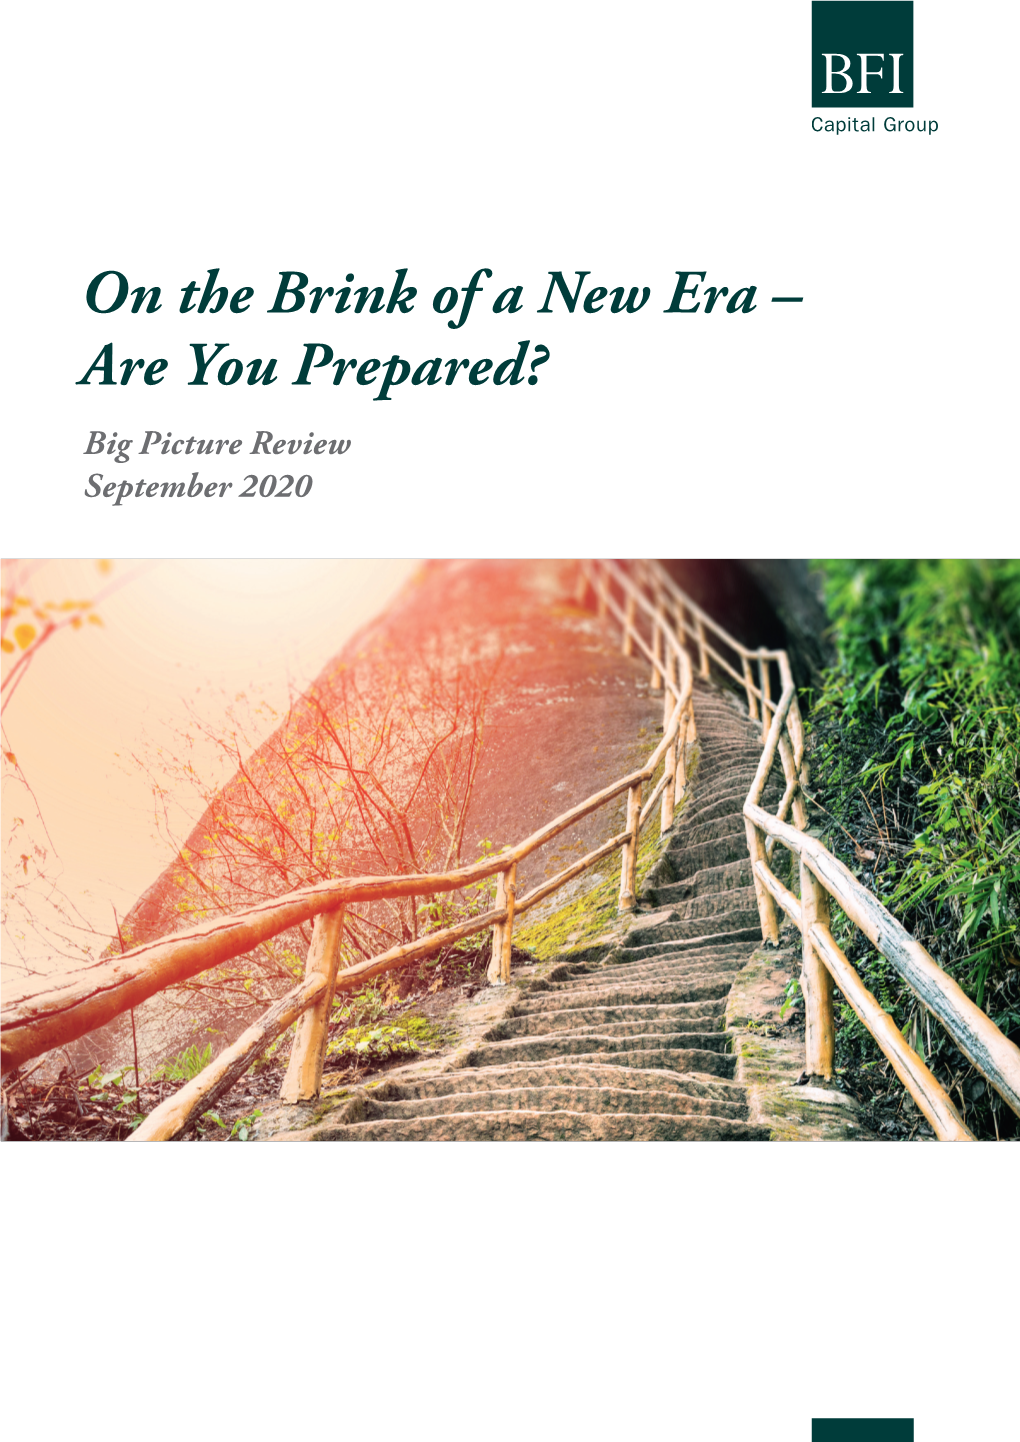 On the Brink of a New Era – Are You Prepared? Big Picture Review September 2020